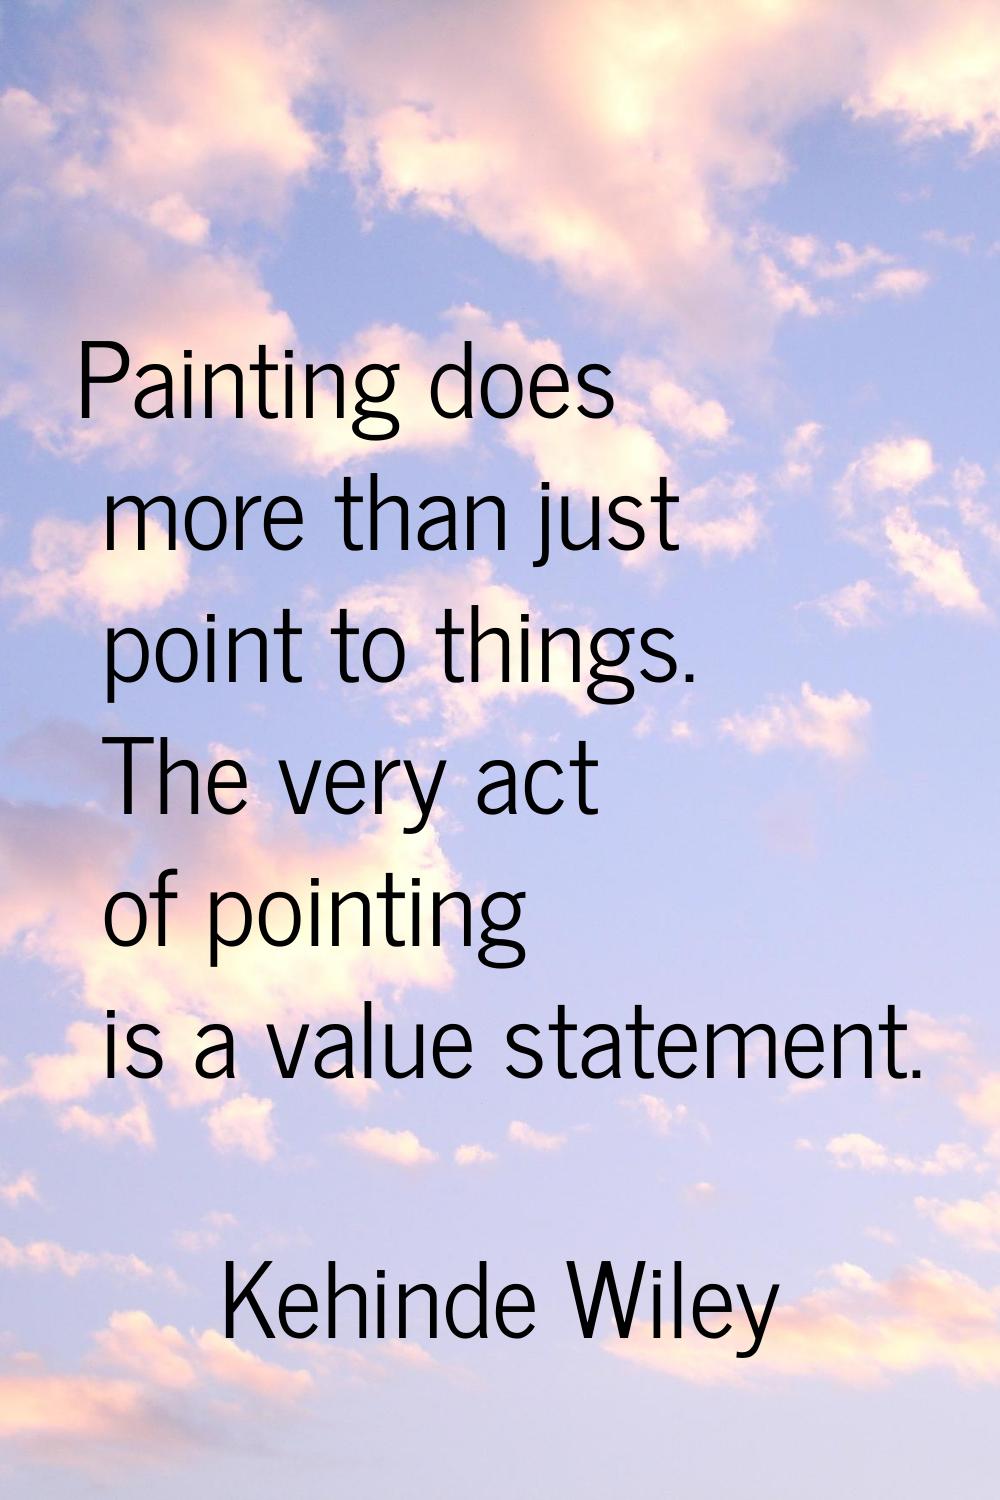 Painting does more than just point to things. The very act of pointing is a value statement.